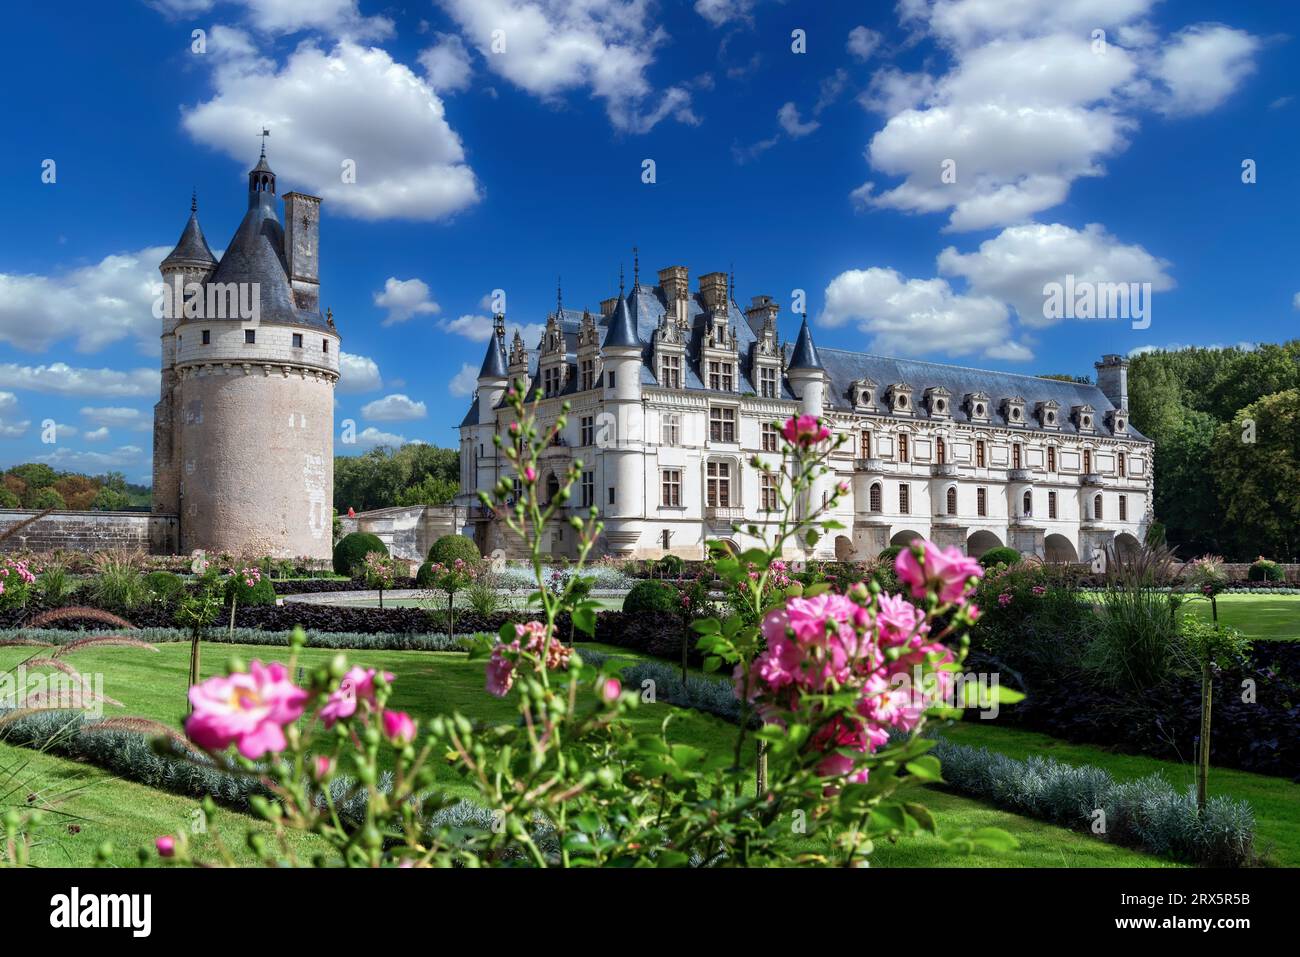 View of the famous internationa Landmark, Chenonceau castle and the beautiful flower garden in Loire Valley in Tours, France Stock Photo